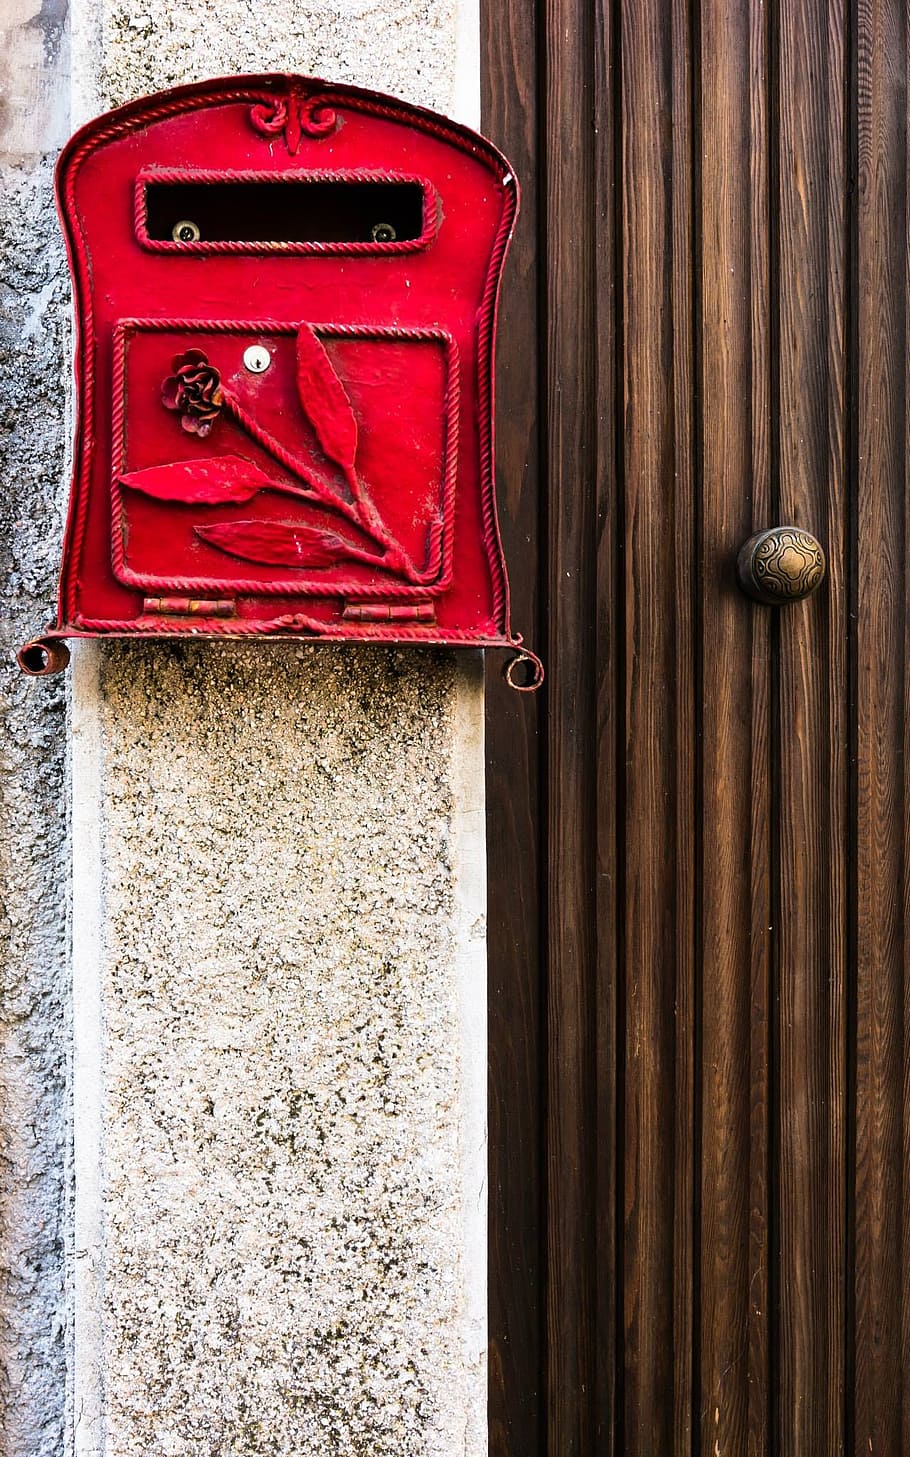 mailbox, post, red, letters, mail, old, old-fashioned, correspondence, wood - Material, mail Slot